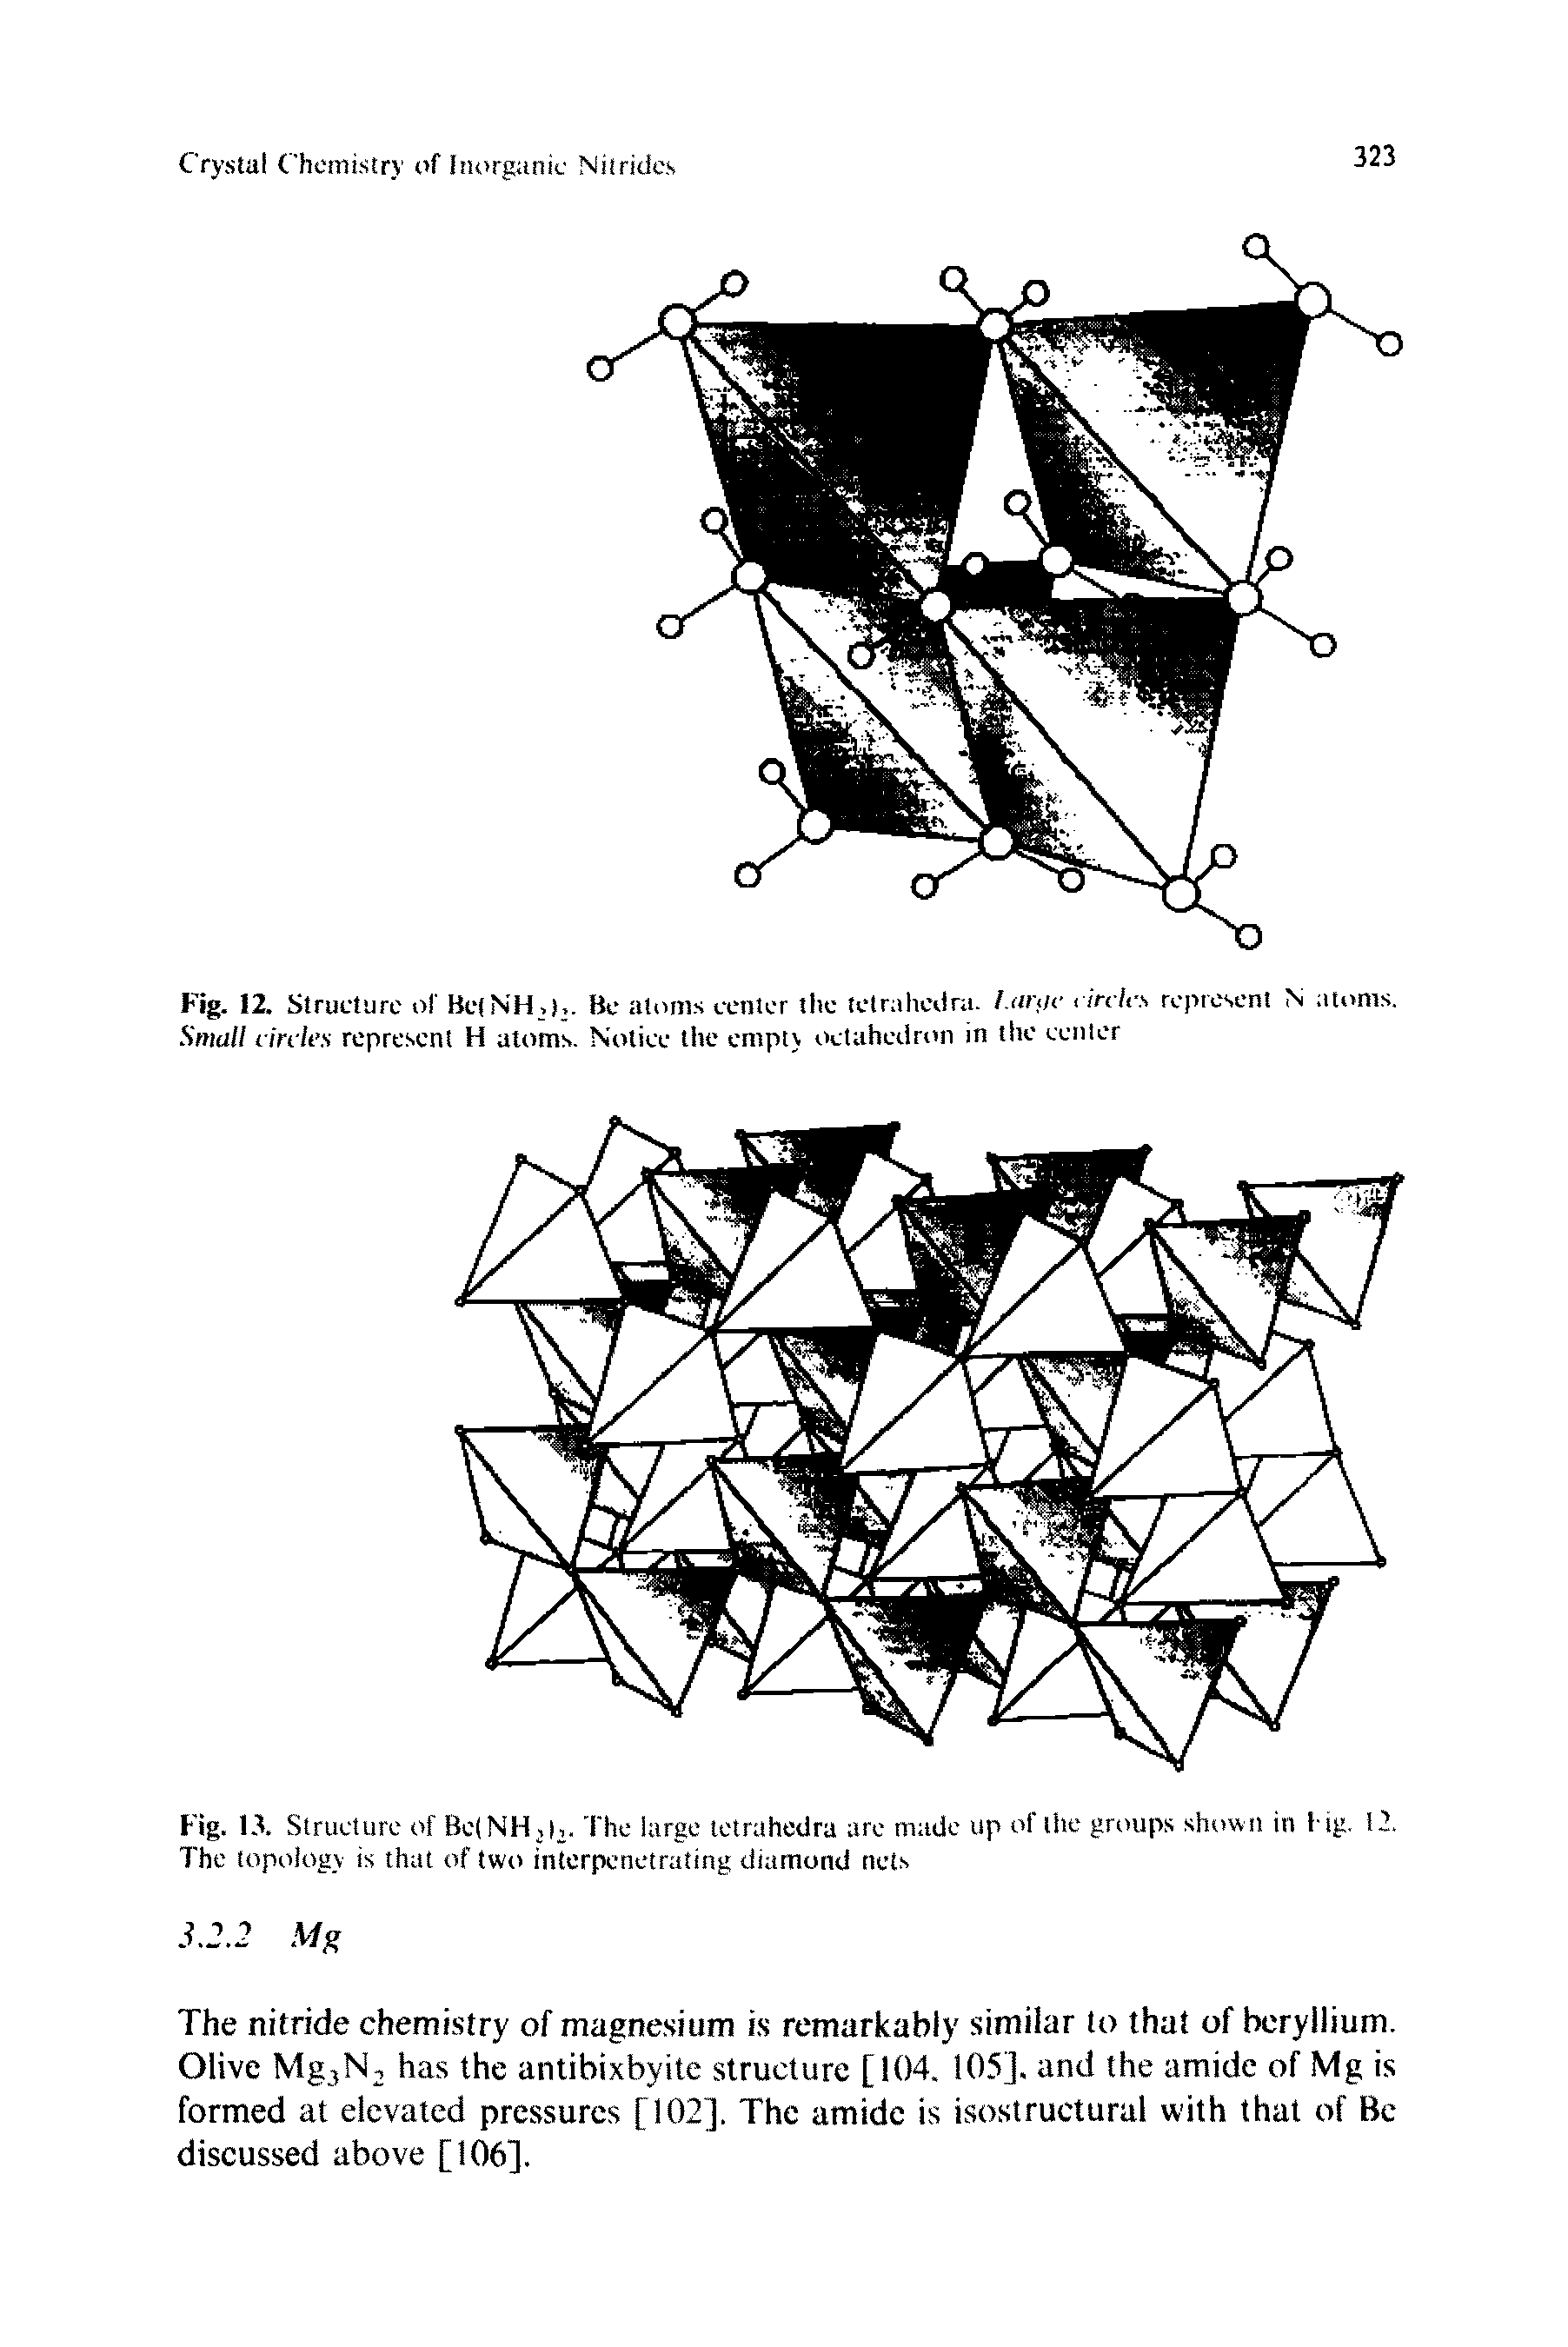 Fig. 13, Structure of Be(NH j, . The large tetrahedra are made up of the groups shown in l it. 12. The topology is that of two interpenetrating diamond nets...